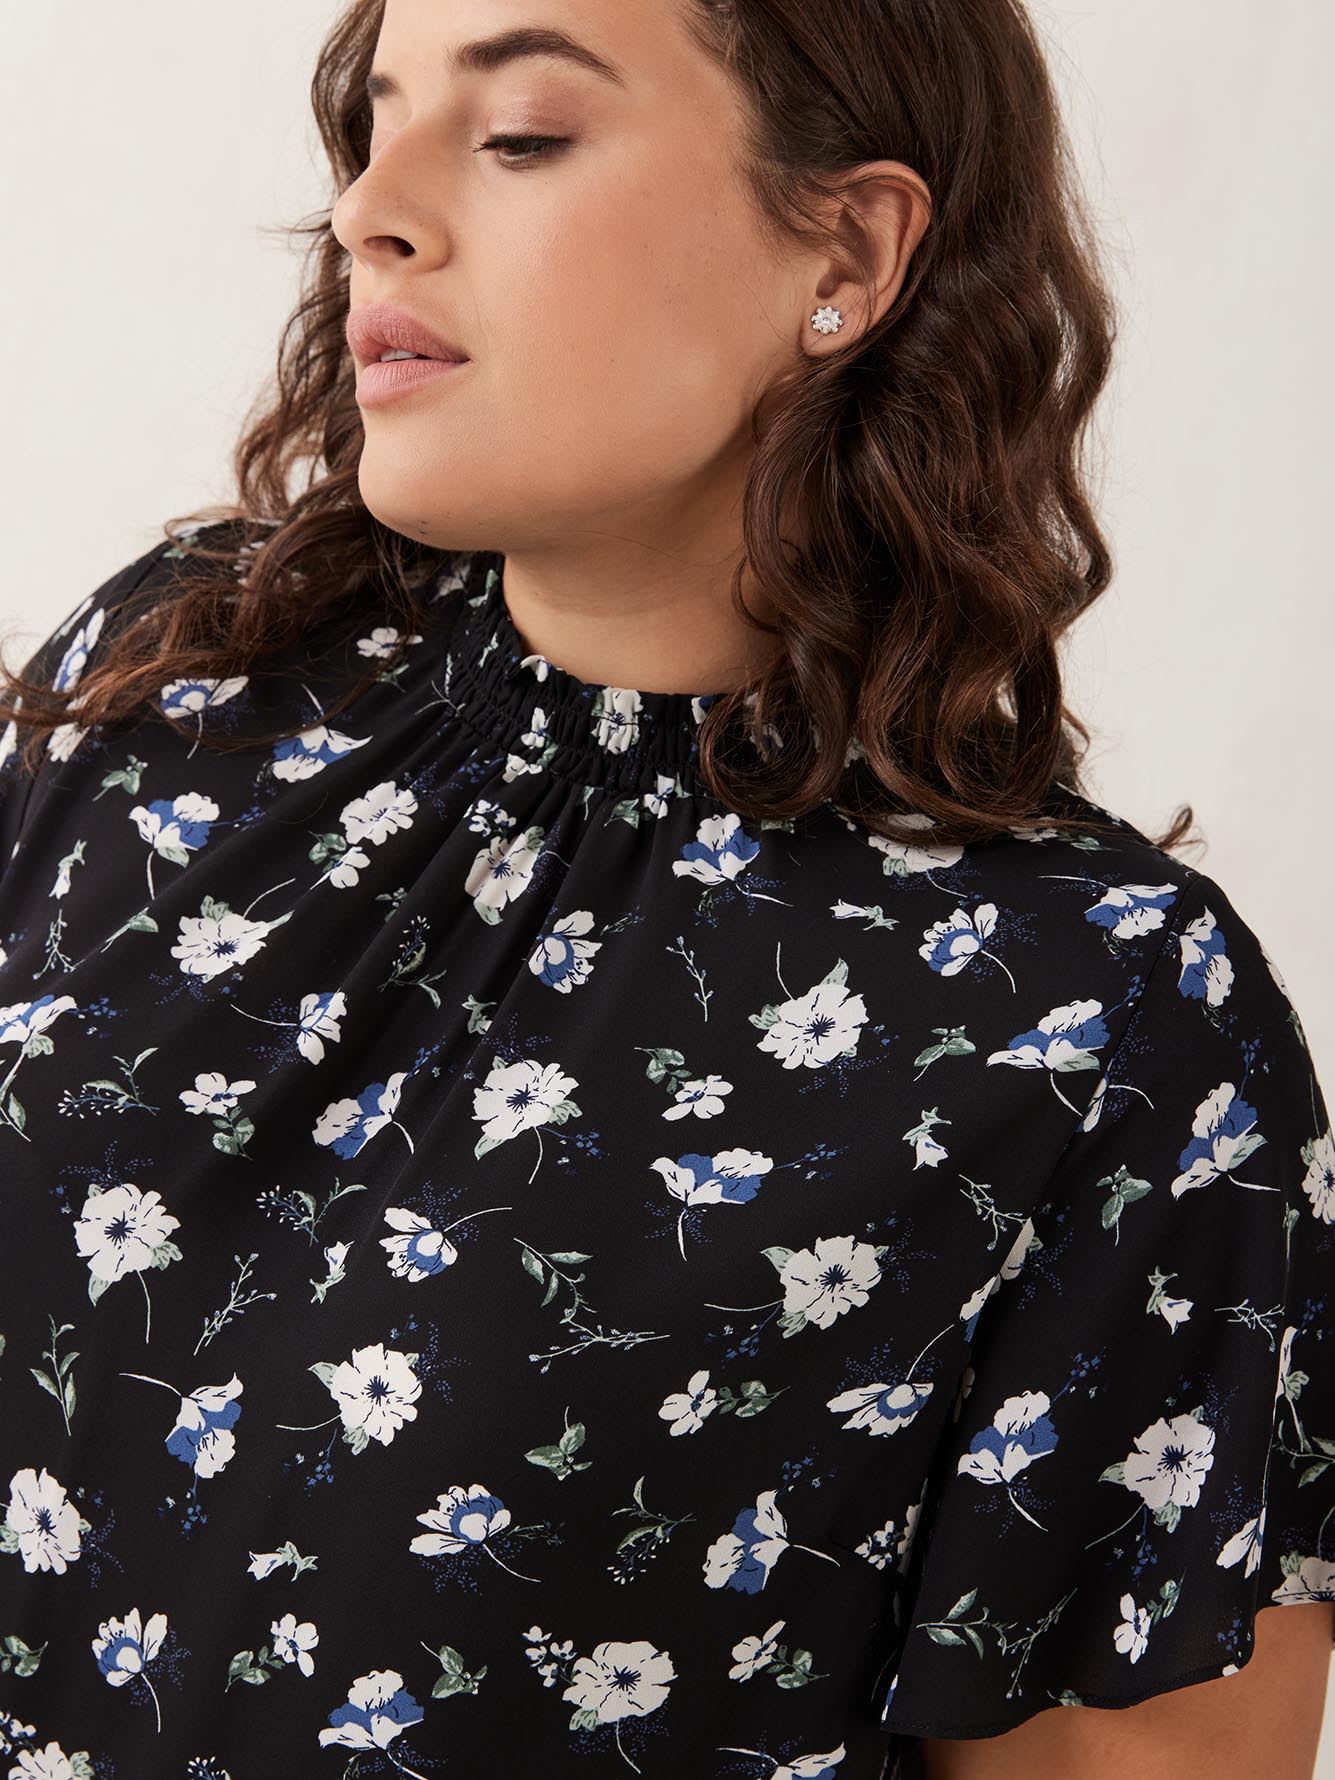 Responsible, Printed Blouse with Short Flutter Sleeves | Penningtons